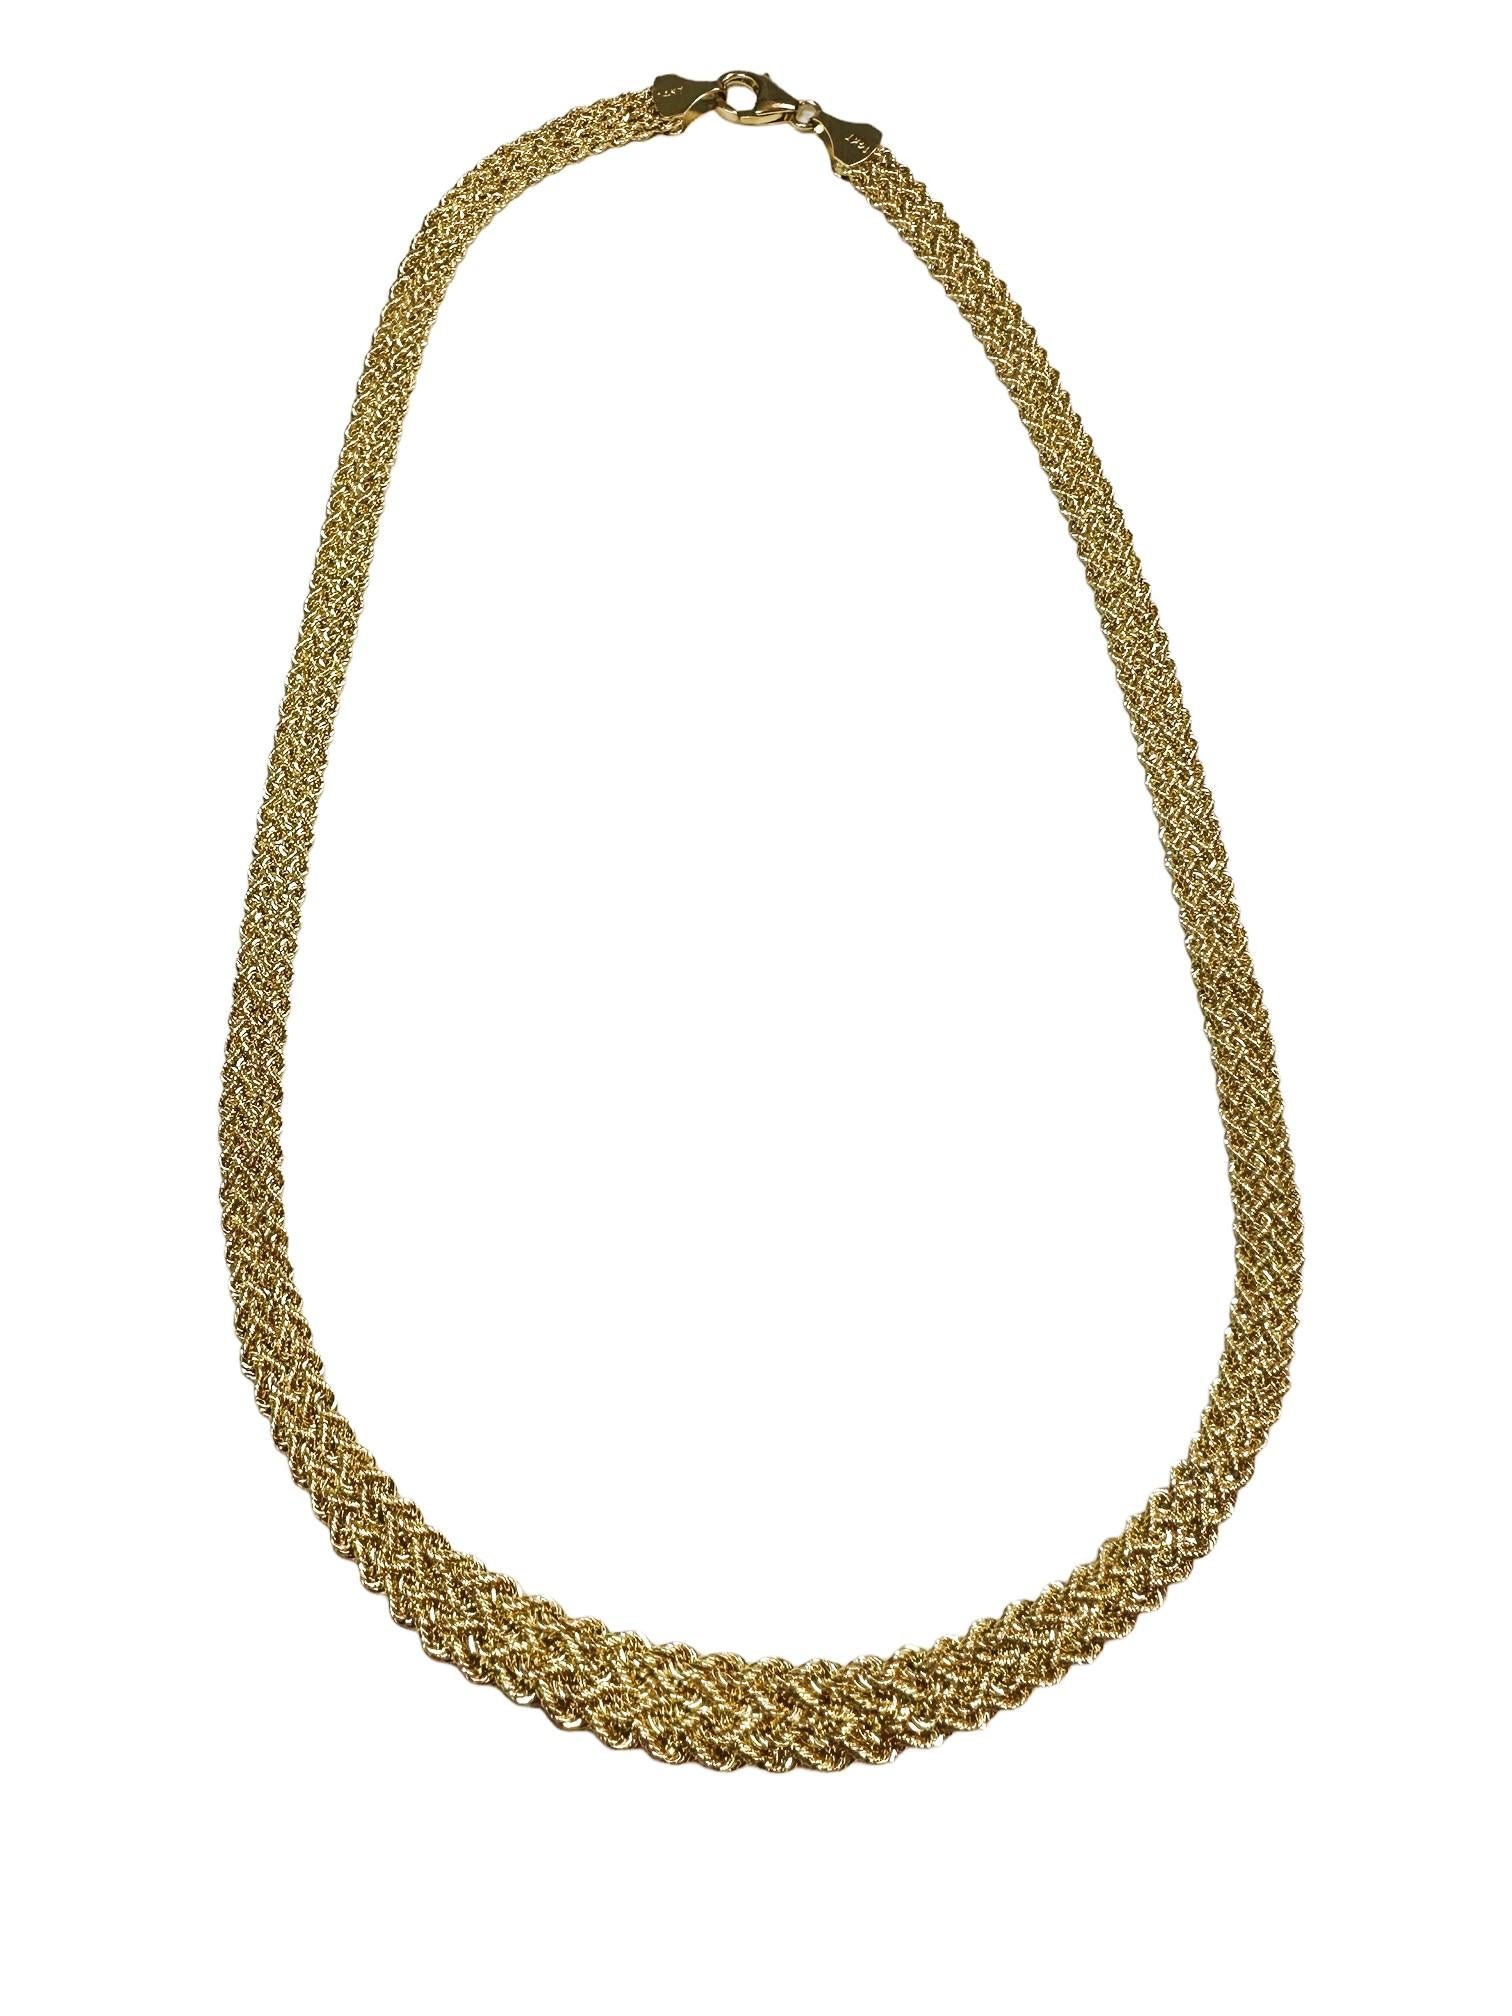 14k Yellow Gold Graduated Wove Aurafin Italian Necklace 16 Inches For Sale 1